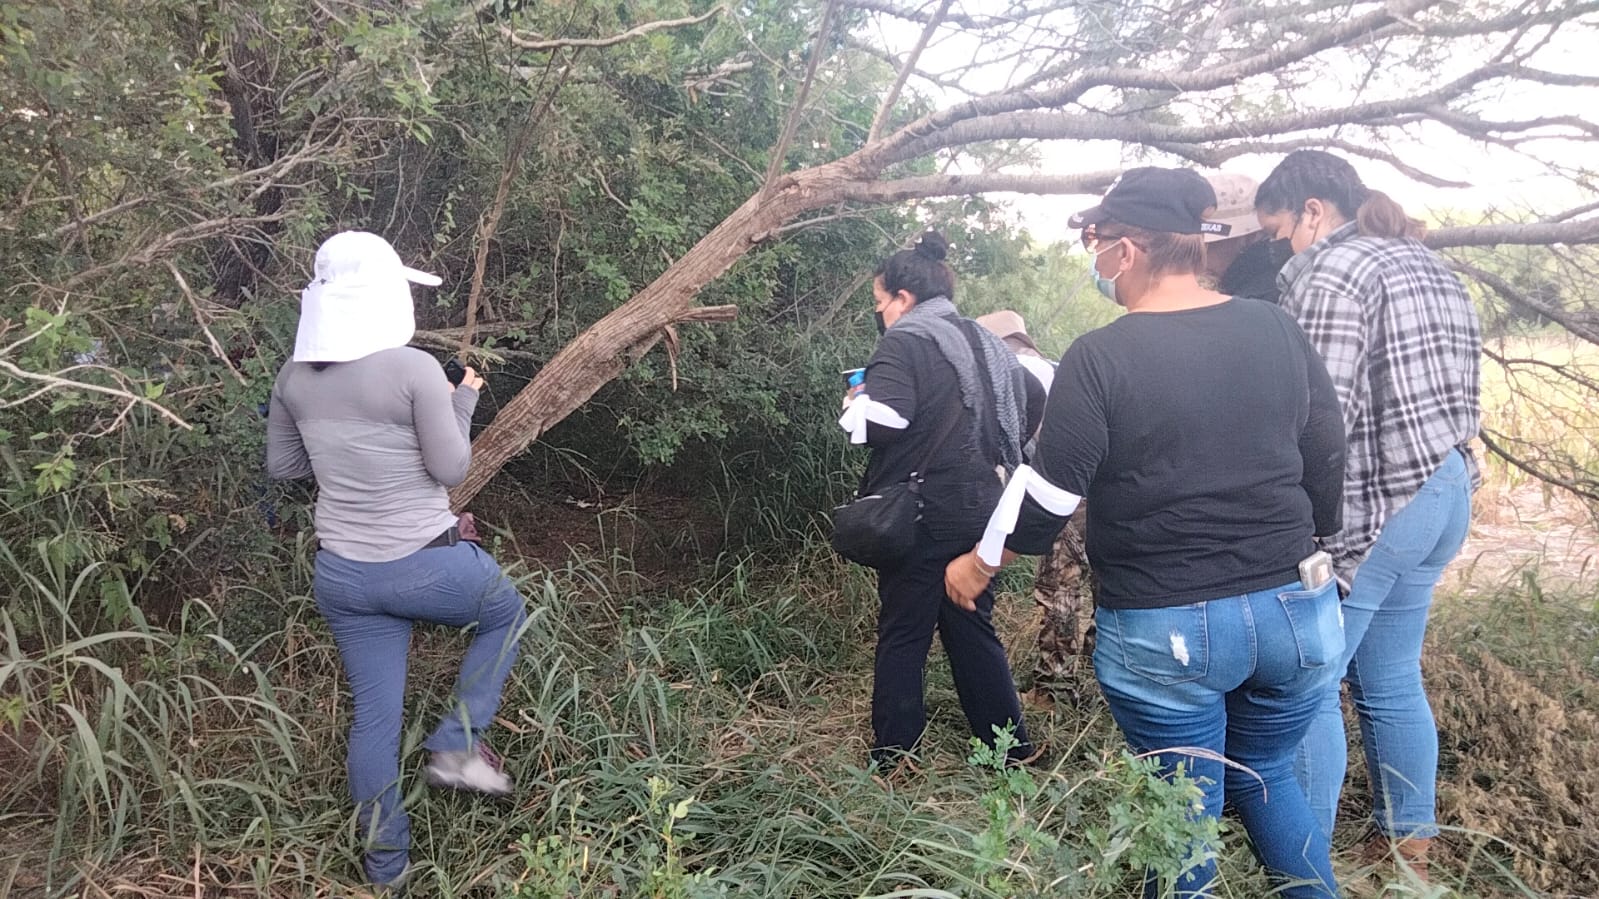 Colectivos enter without permission of FGR to extermination center in Tamaulipas